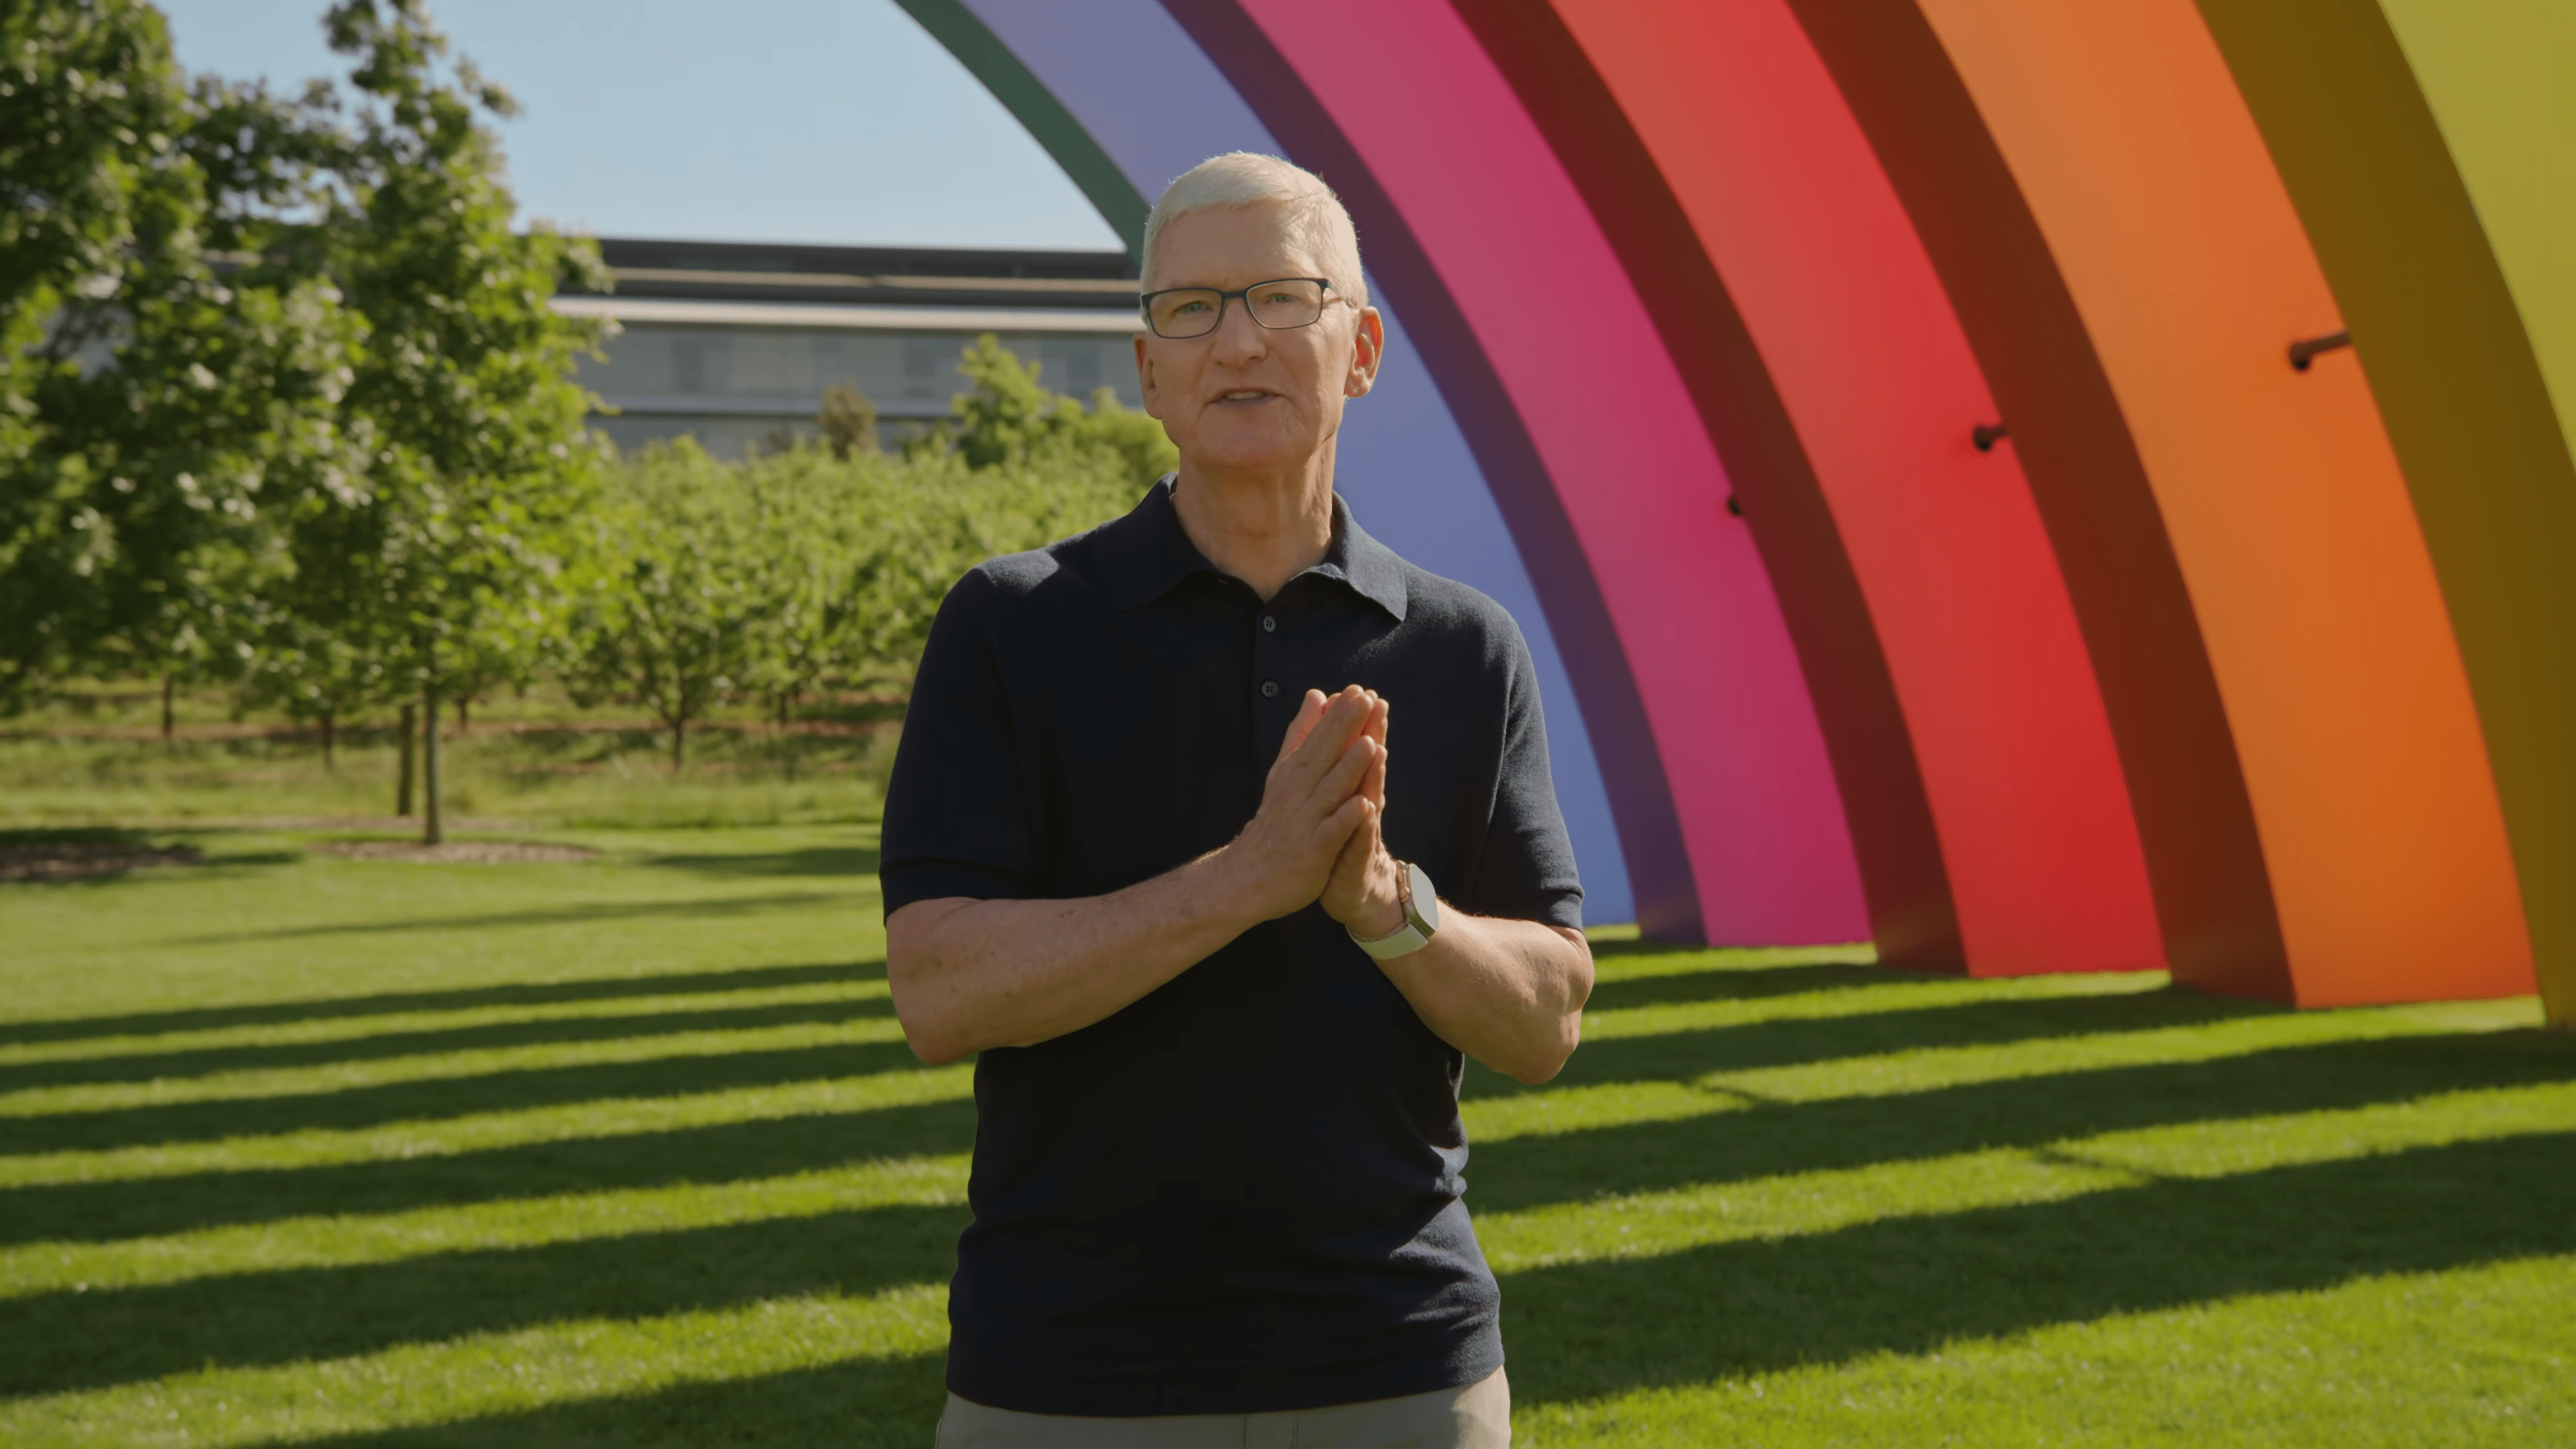 Apple CEO Tim Cook uses ChatGPT, but urges caution